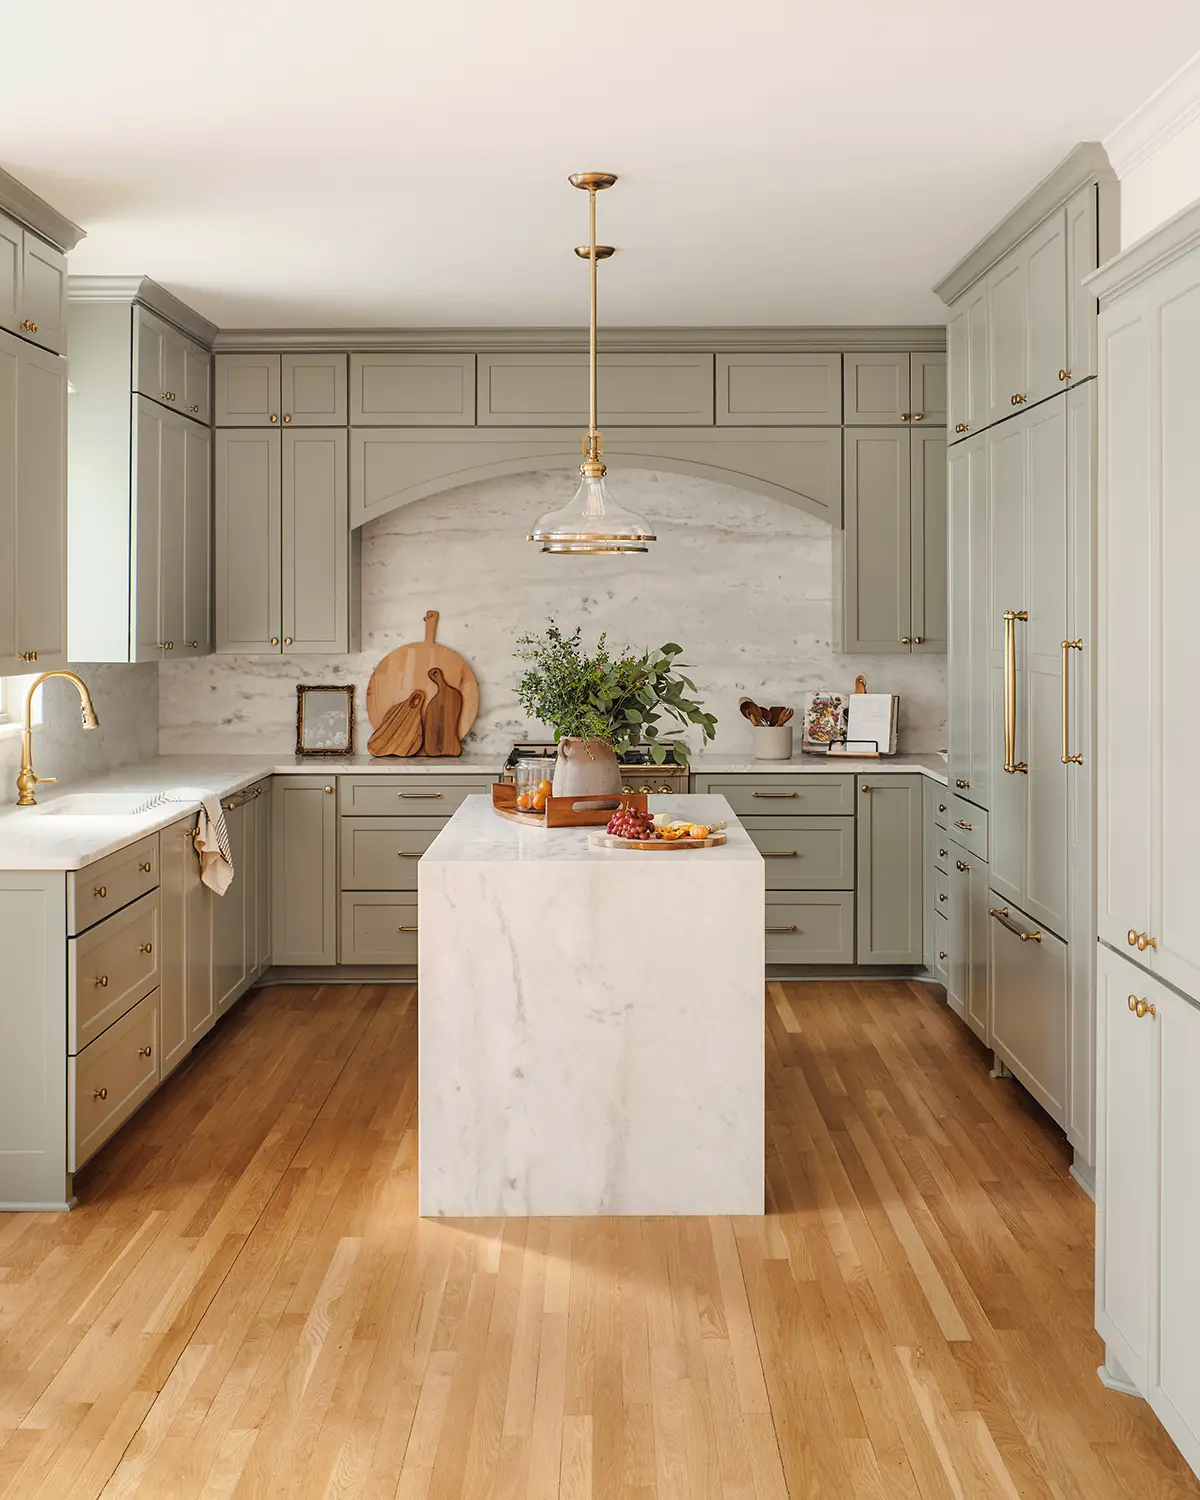 The 20 Best Sage Green Cabinet Paint Colors (from real kitchens